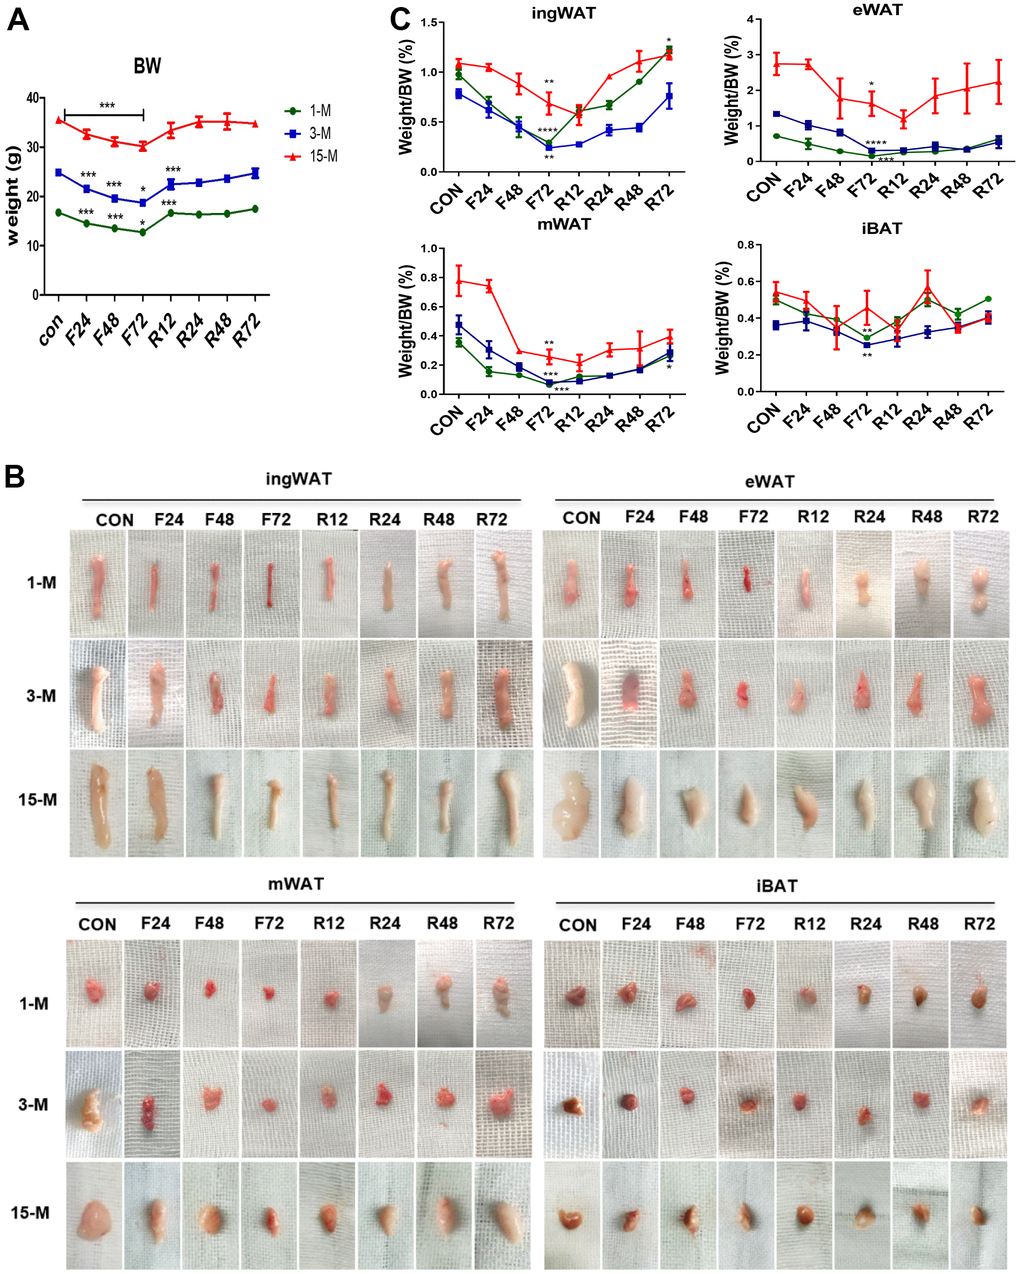 Change in the body weight and fat mass of mice belonging to the different experimental groups subjected to fasting and refeeding. All mice were fasted for 24, 48 and 72 h (F24 h, F48 h and F72 h) respectively, and then fed again for 12, 24, 48 and 72 h (R12 h, R24 h, R48 h and R72 h), respectively. After 72 h of fasting, the body weight and morphology of various adipose tissues (A, B) from the different age groups were evaluated. Weights of adipose tissues (ingWAT, eWAT, mWAT, iBAT) expressed as a percentage of body weight in mice of the three groups (C) were also analyzed. All data are presented as the mean ± SEM.* p p p 